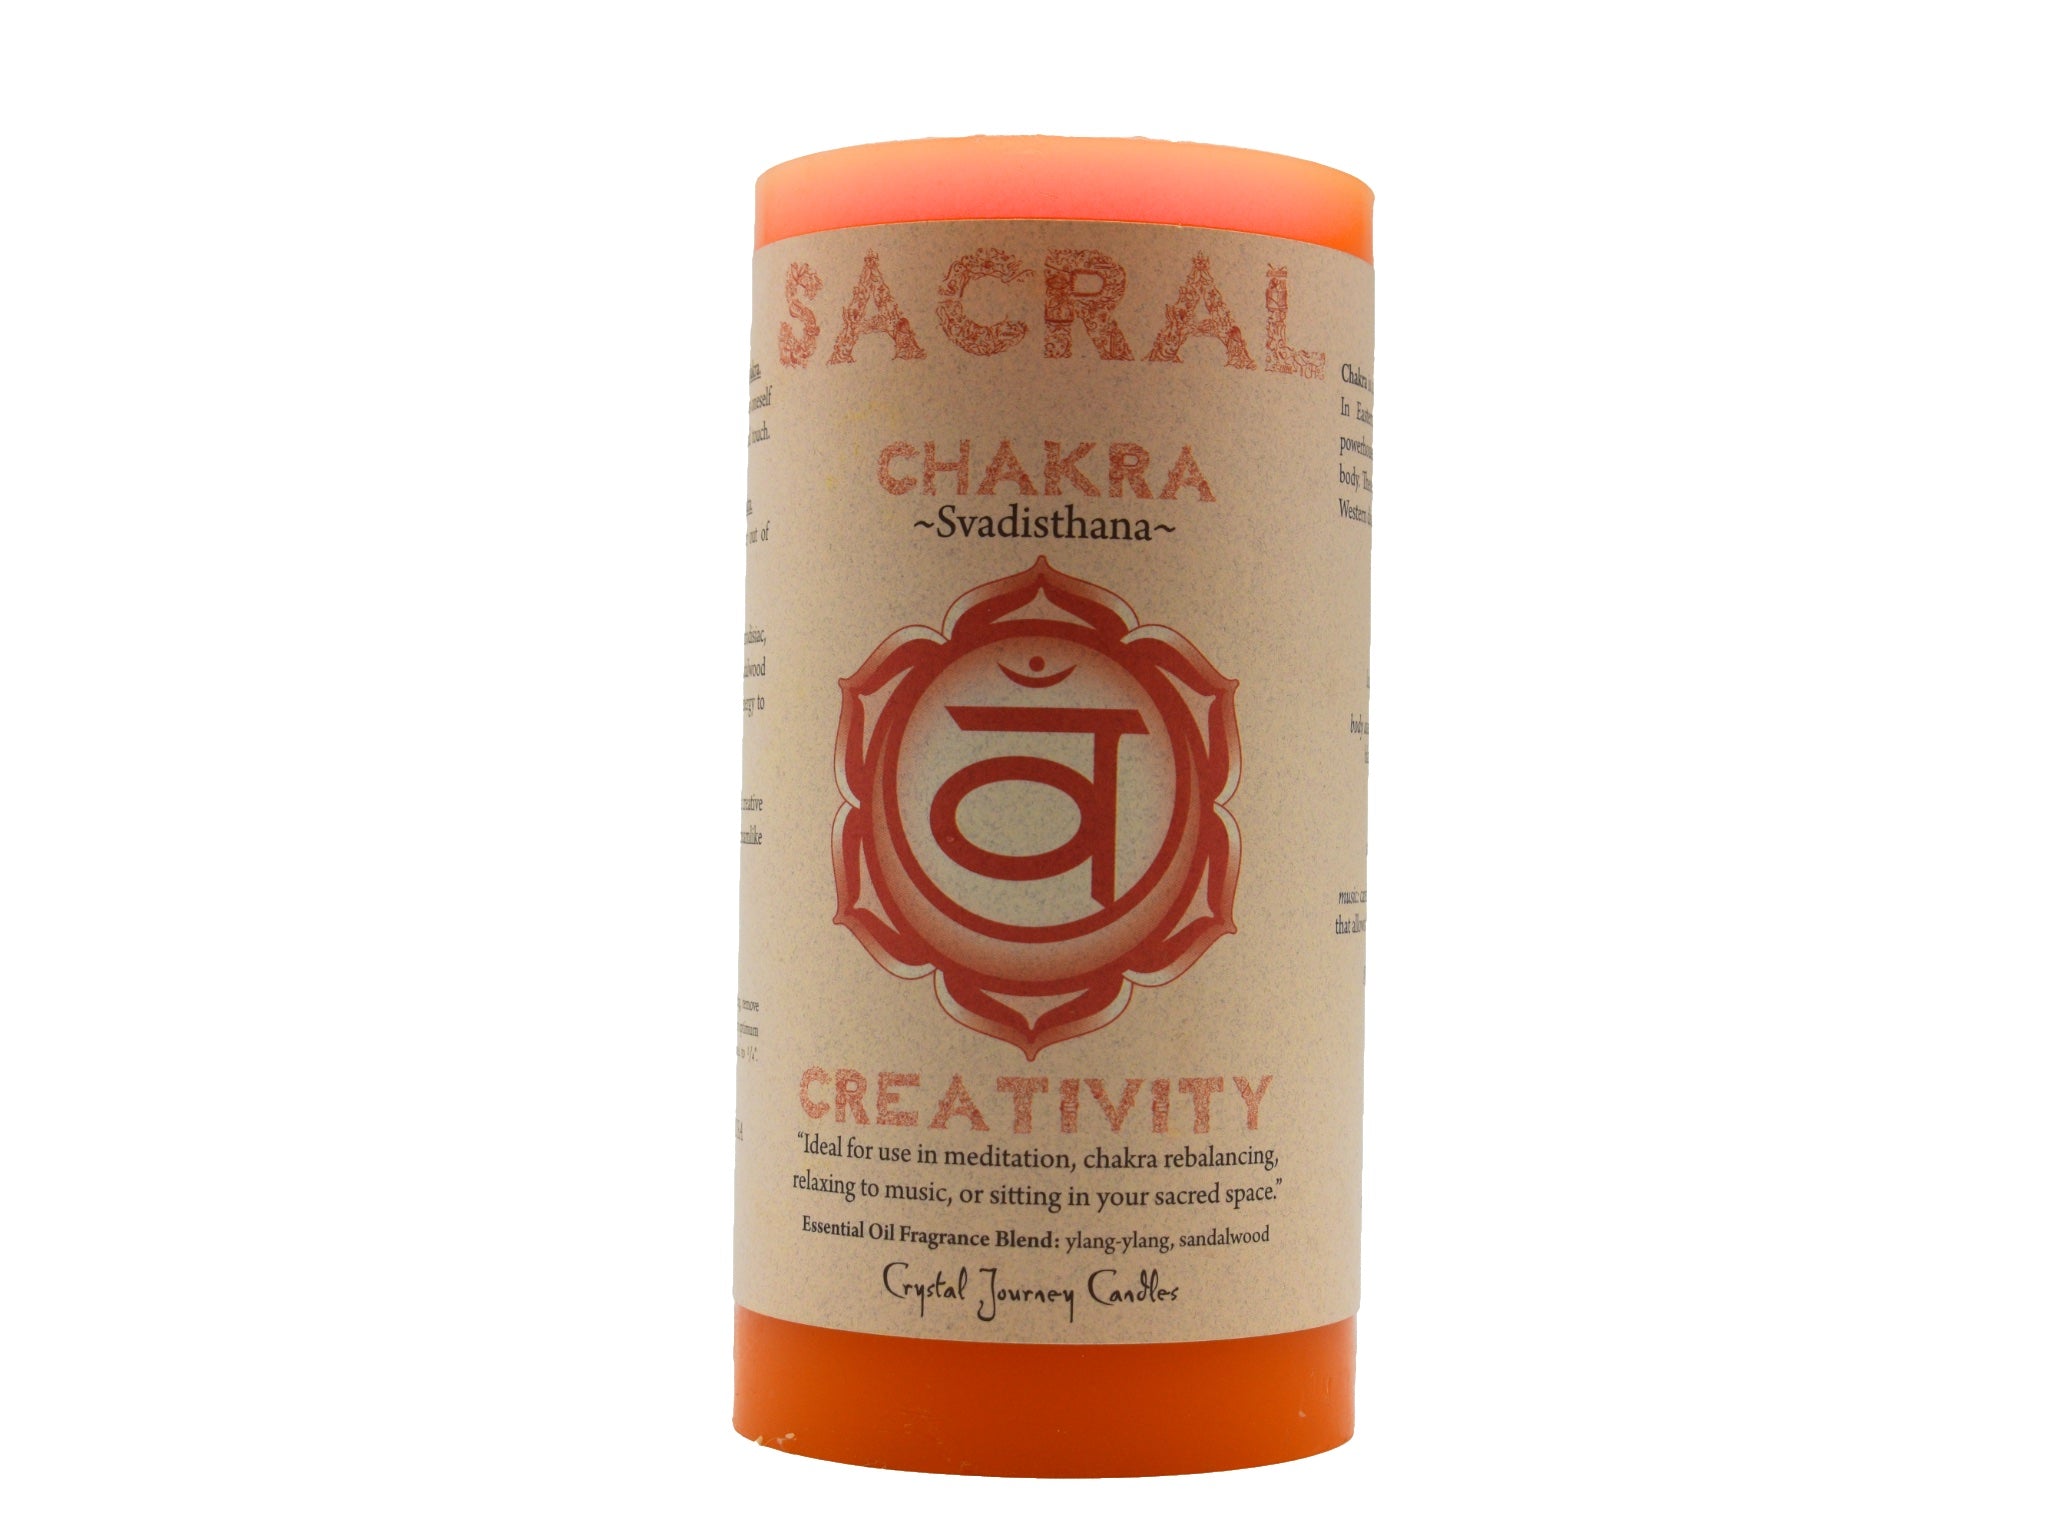 Sacral Chakra Candle.  3x6 inch orange pillar candle is infused with Ylang Ylang and Sandalwood essential oils.   Use this candle to enhance creativity.